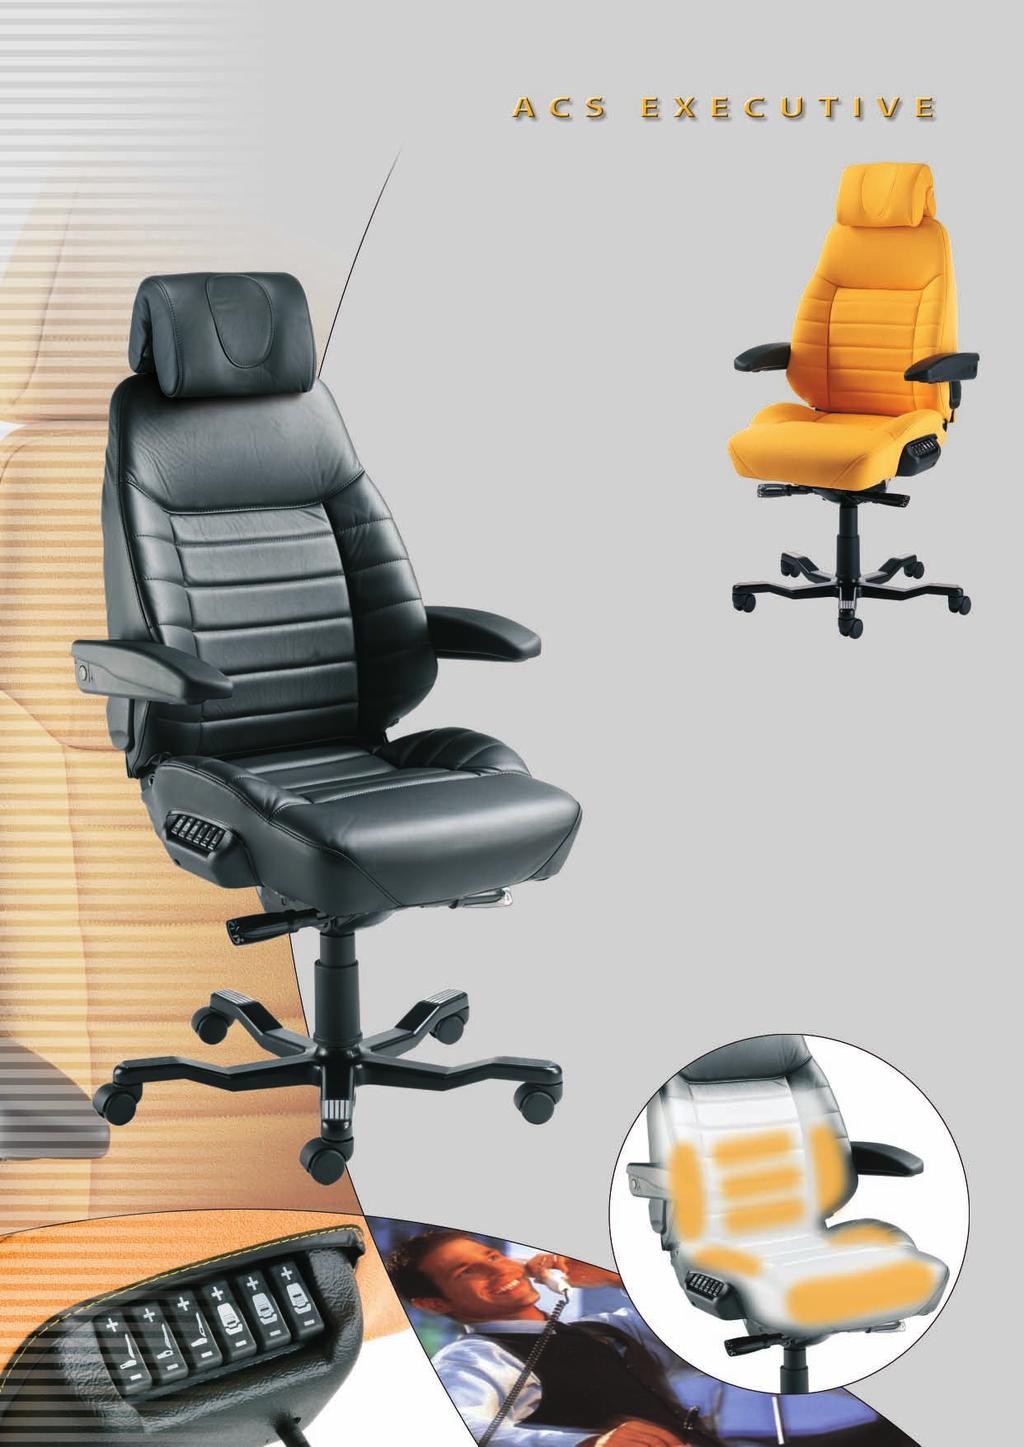 The KAB Office chair range is Lifestyle friendly to suit all working environments The top model of the KAB range is ideal for company executives and entrepreneurs.